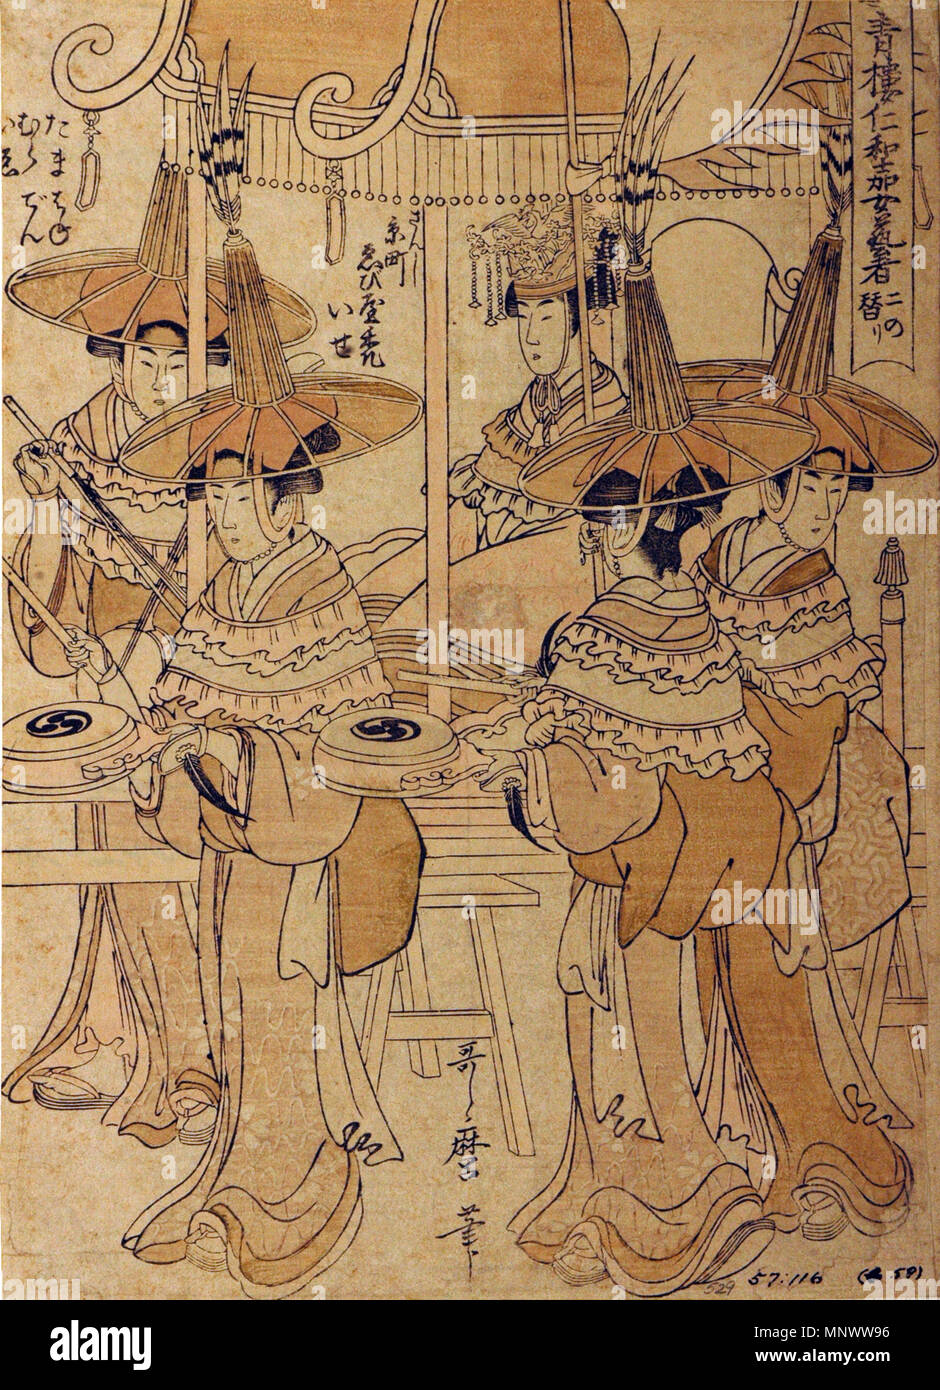 . English: Accession Number: 1957.116 Display Artist: Kitagawa Utamaro Display Title: 'The geisha Tama, Hane, Mura, Den, Iye(?) and the kamuro Ise' Series Title: Seiro niwaka onna geisha ni no kawari (Geisha Performing in the Niwaka Festival) Suite Name: Seiro niwaka onna geisha ni no kawari Creation Date: 1797-1798 Medium: Woodblock Height: 12 7/16 in. Width: 8 15/16 in. Display Dimensions: 12 7/16 in. x 8 15/16 in. (31.59 cm x 22.7 cm) Credit Line: Bequest of Mrs Cora Timken Burnett Label Copy: 'Geisha, as opposed to courtesans, were performers who were highly trained to entertain their clie Stock Photo